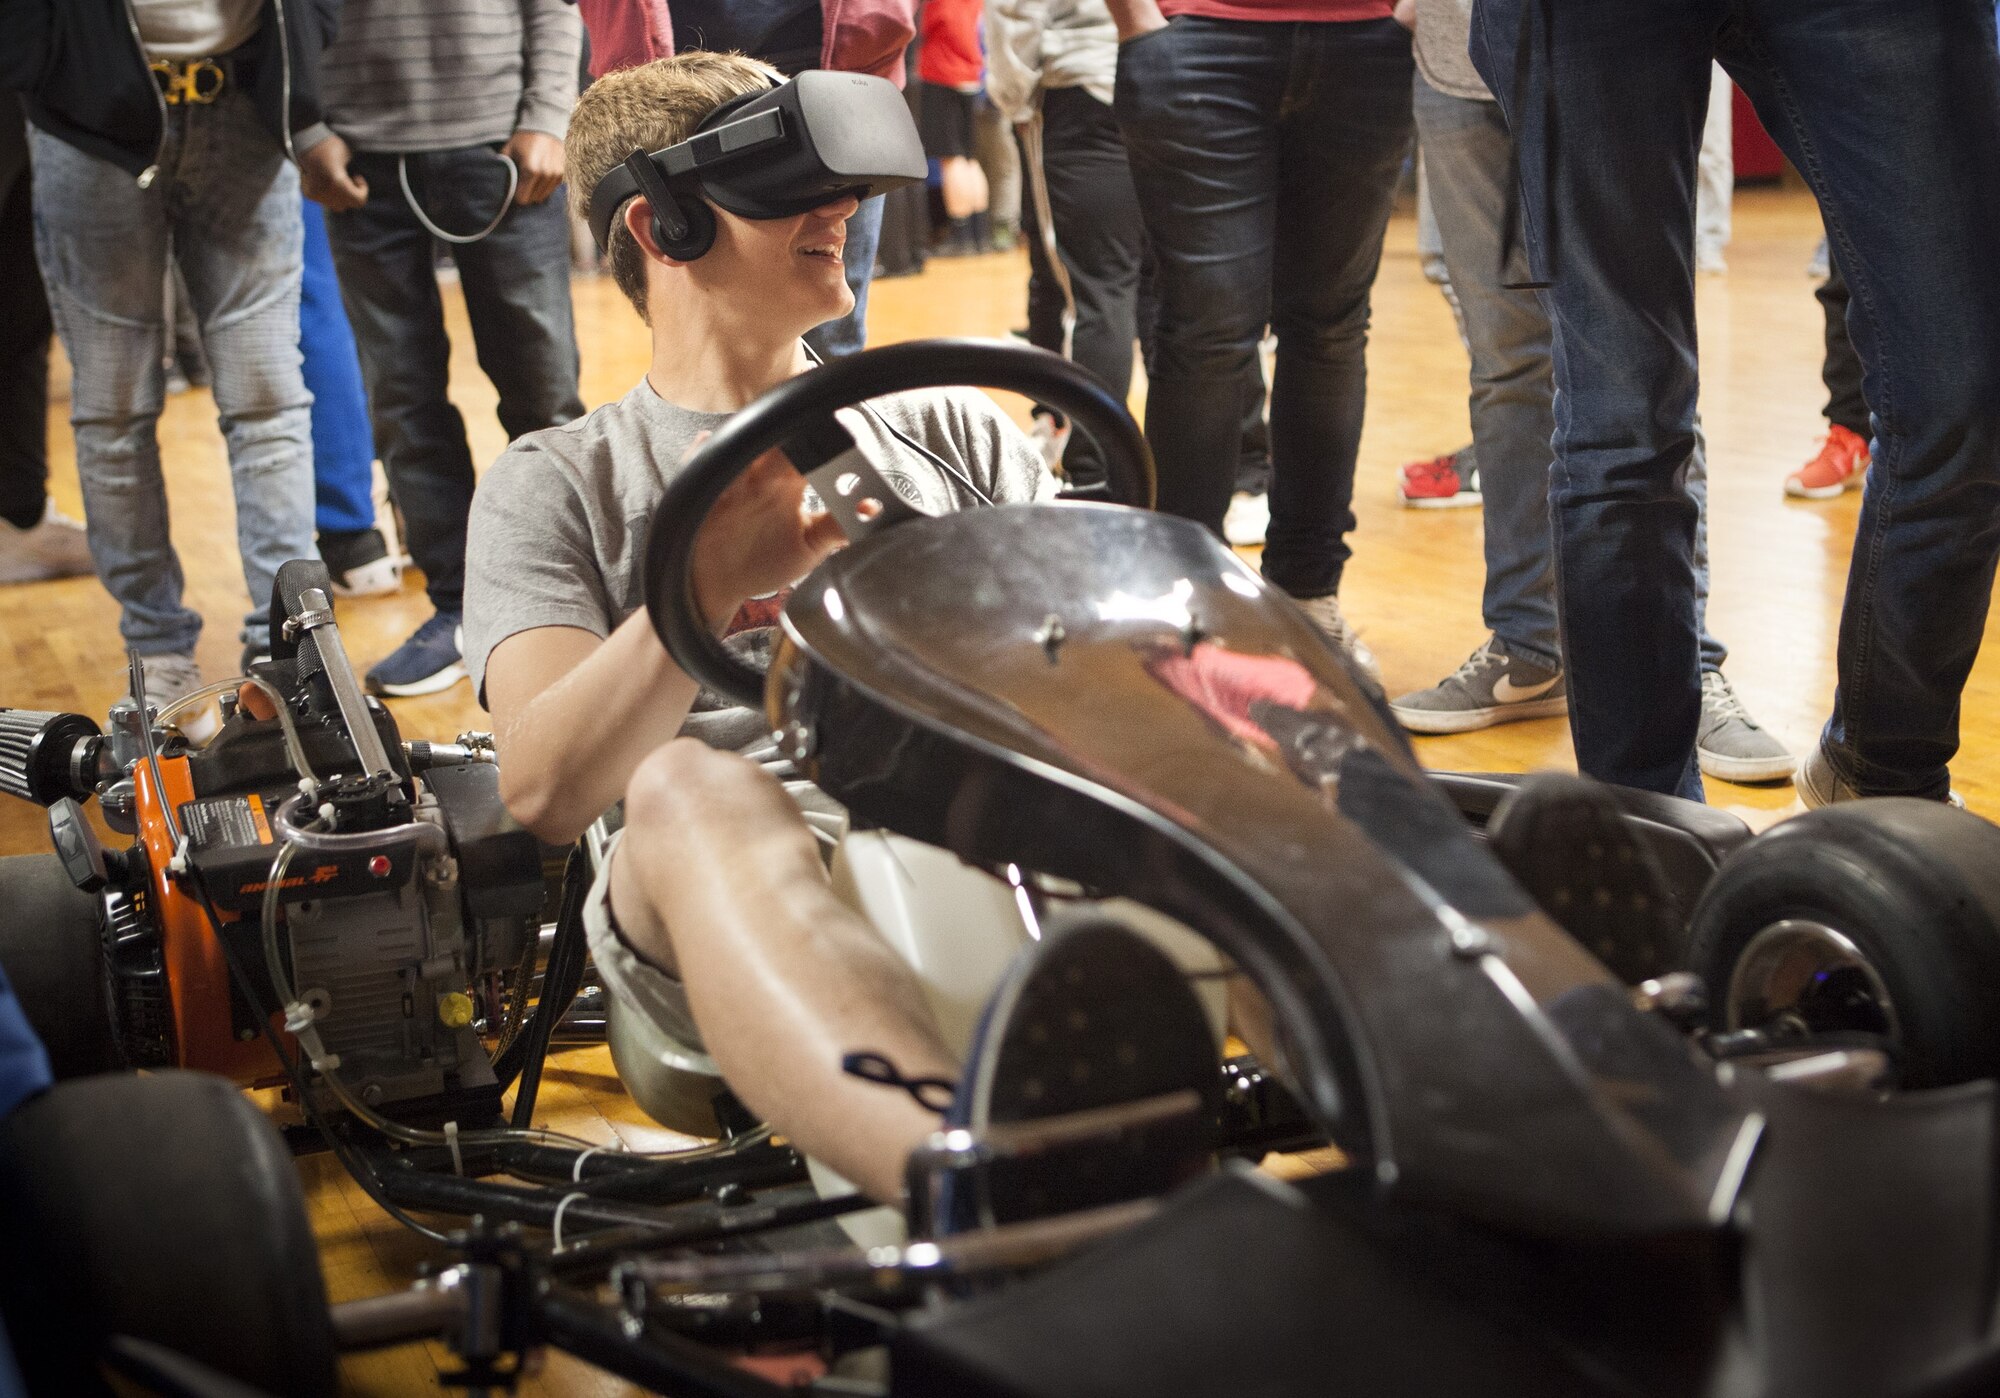 A participant explores virtual reality capabilities in gaming software during the sixth annual Full-Throttle STEM® at Eldora Day in Rossburg, Ohio, May 8. Students from seven local high schools showcased their STEM-related projects, including their modeling and simulation-based work, and then competed in a remote-controlled (RC) car race at Eldora Speedway.